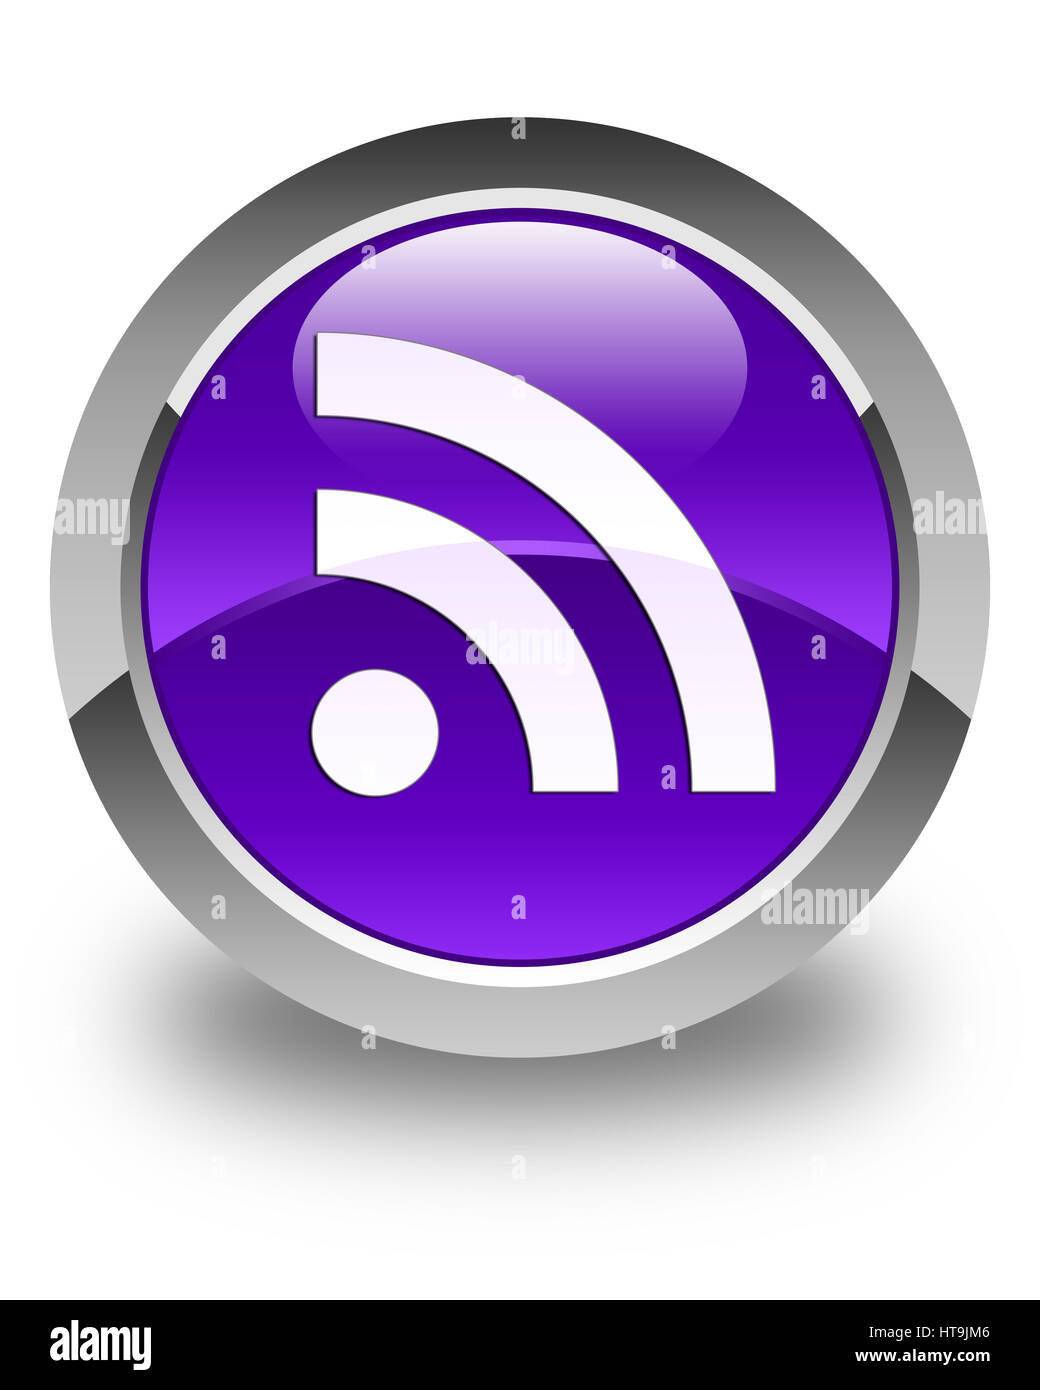 RSS icon isolated on glossy purple round button abstract illustration Stock Photo